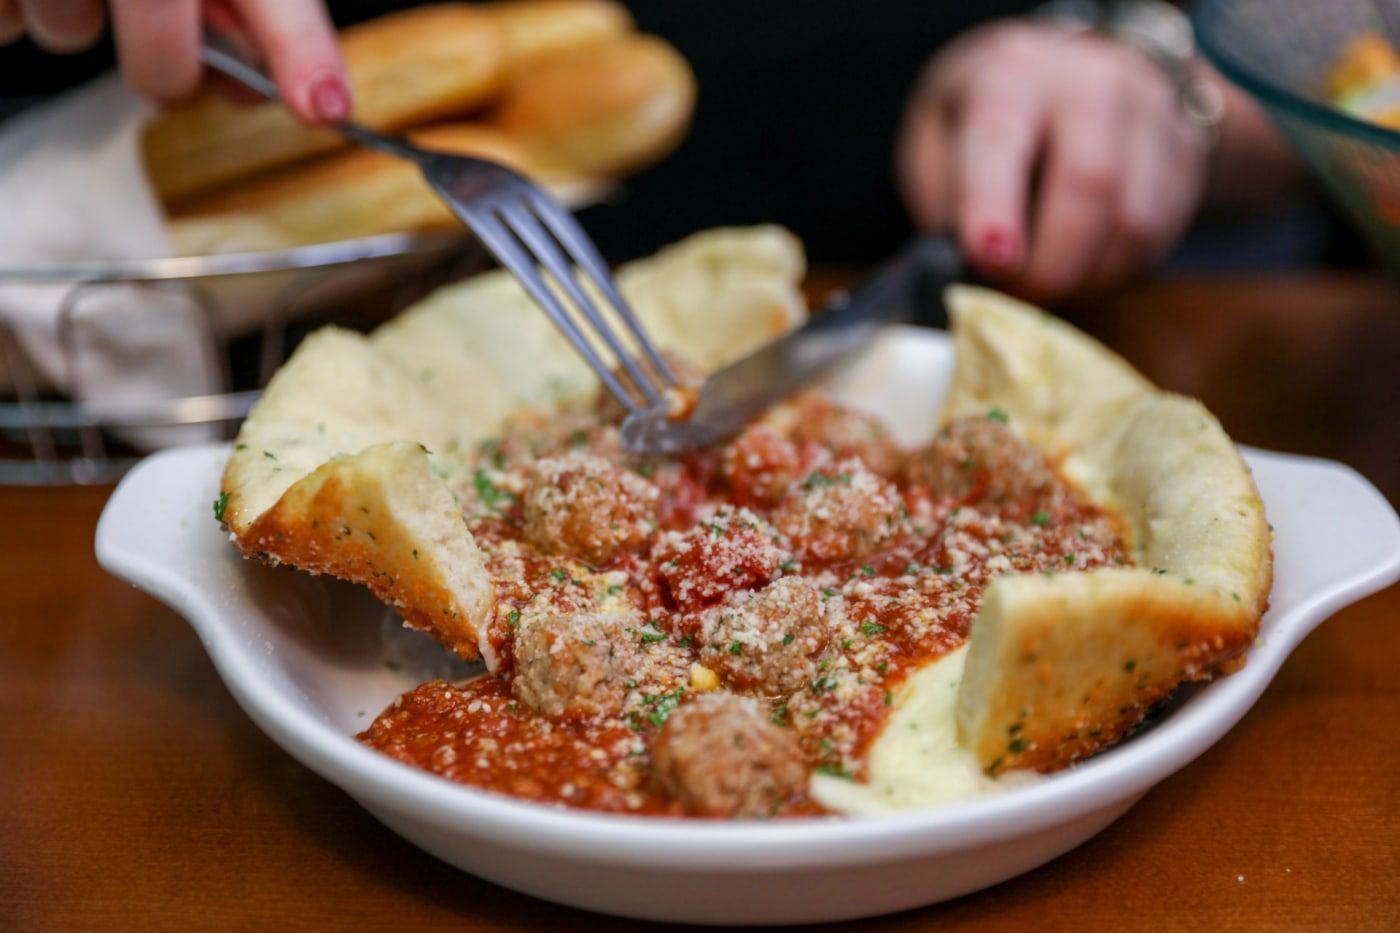 olive_garden_meatball_bread_bowl_180222_inline_c78469ee64c82b6944c7aed15b622bfd.today-inline-large2x.jpg